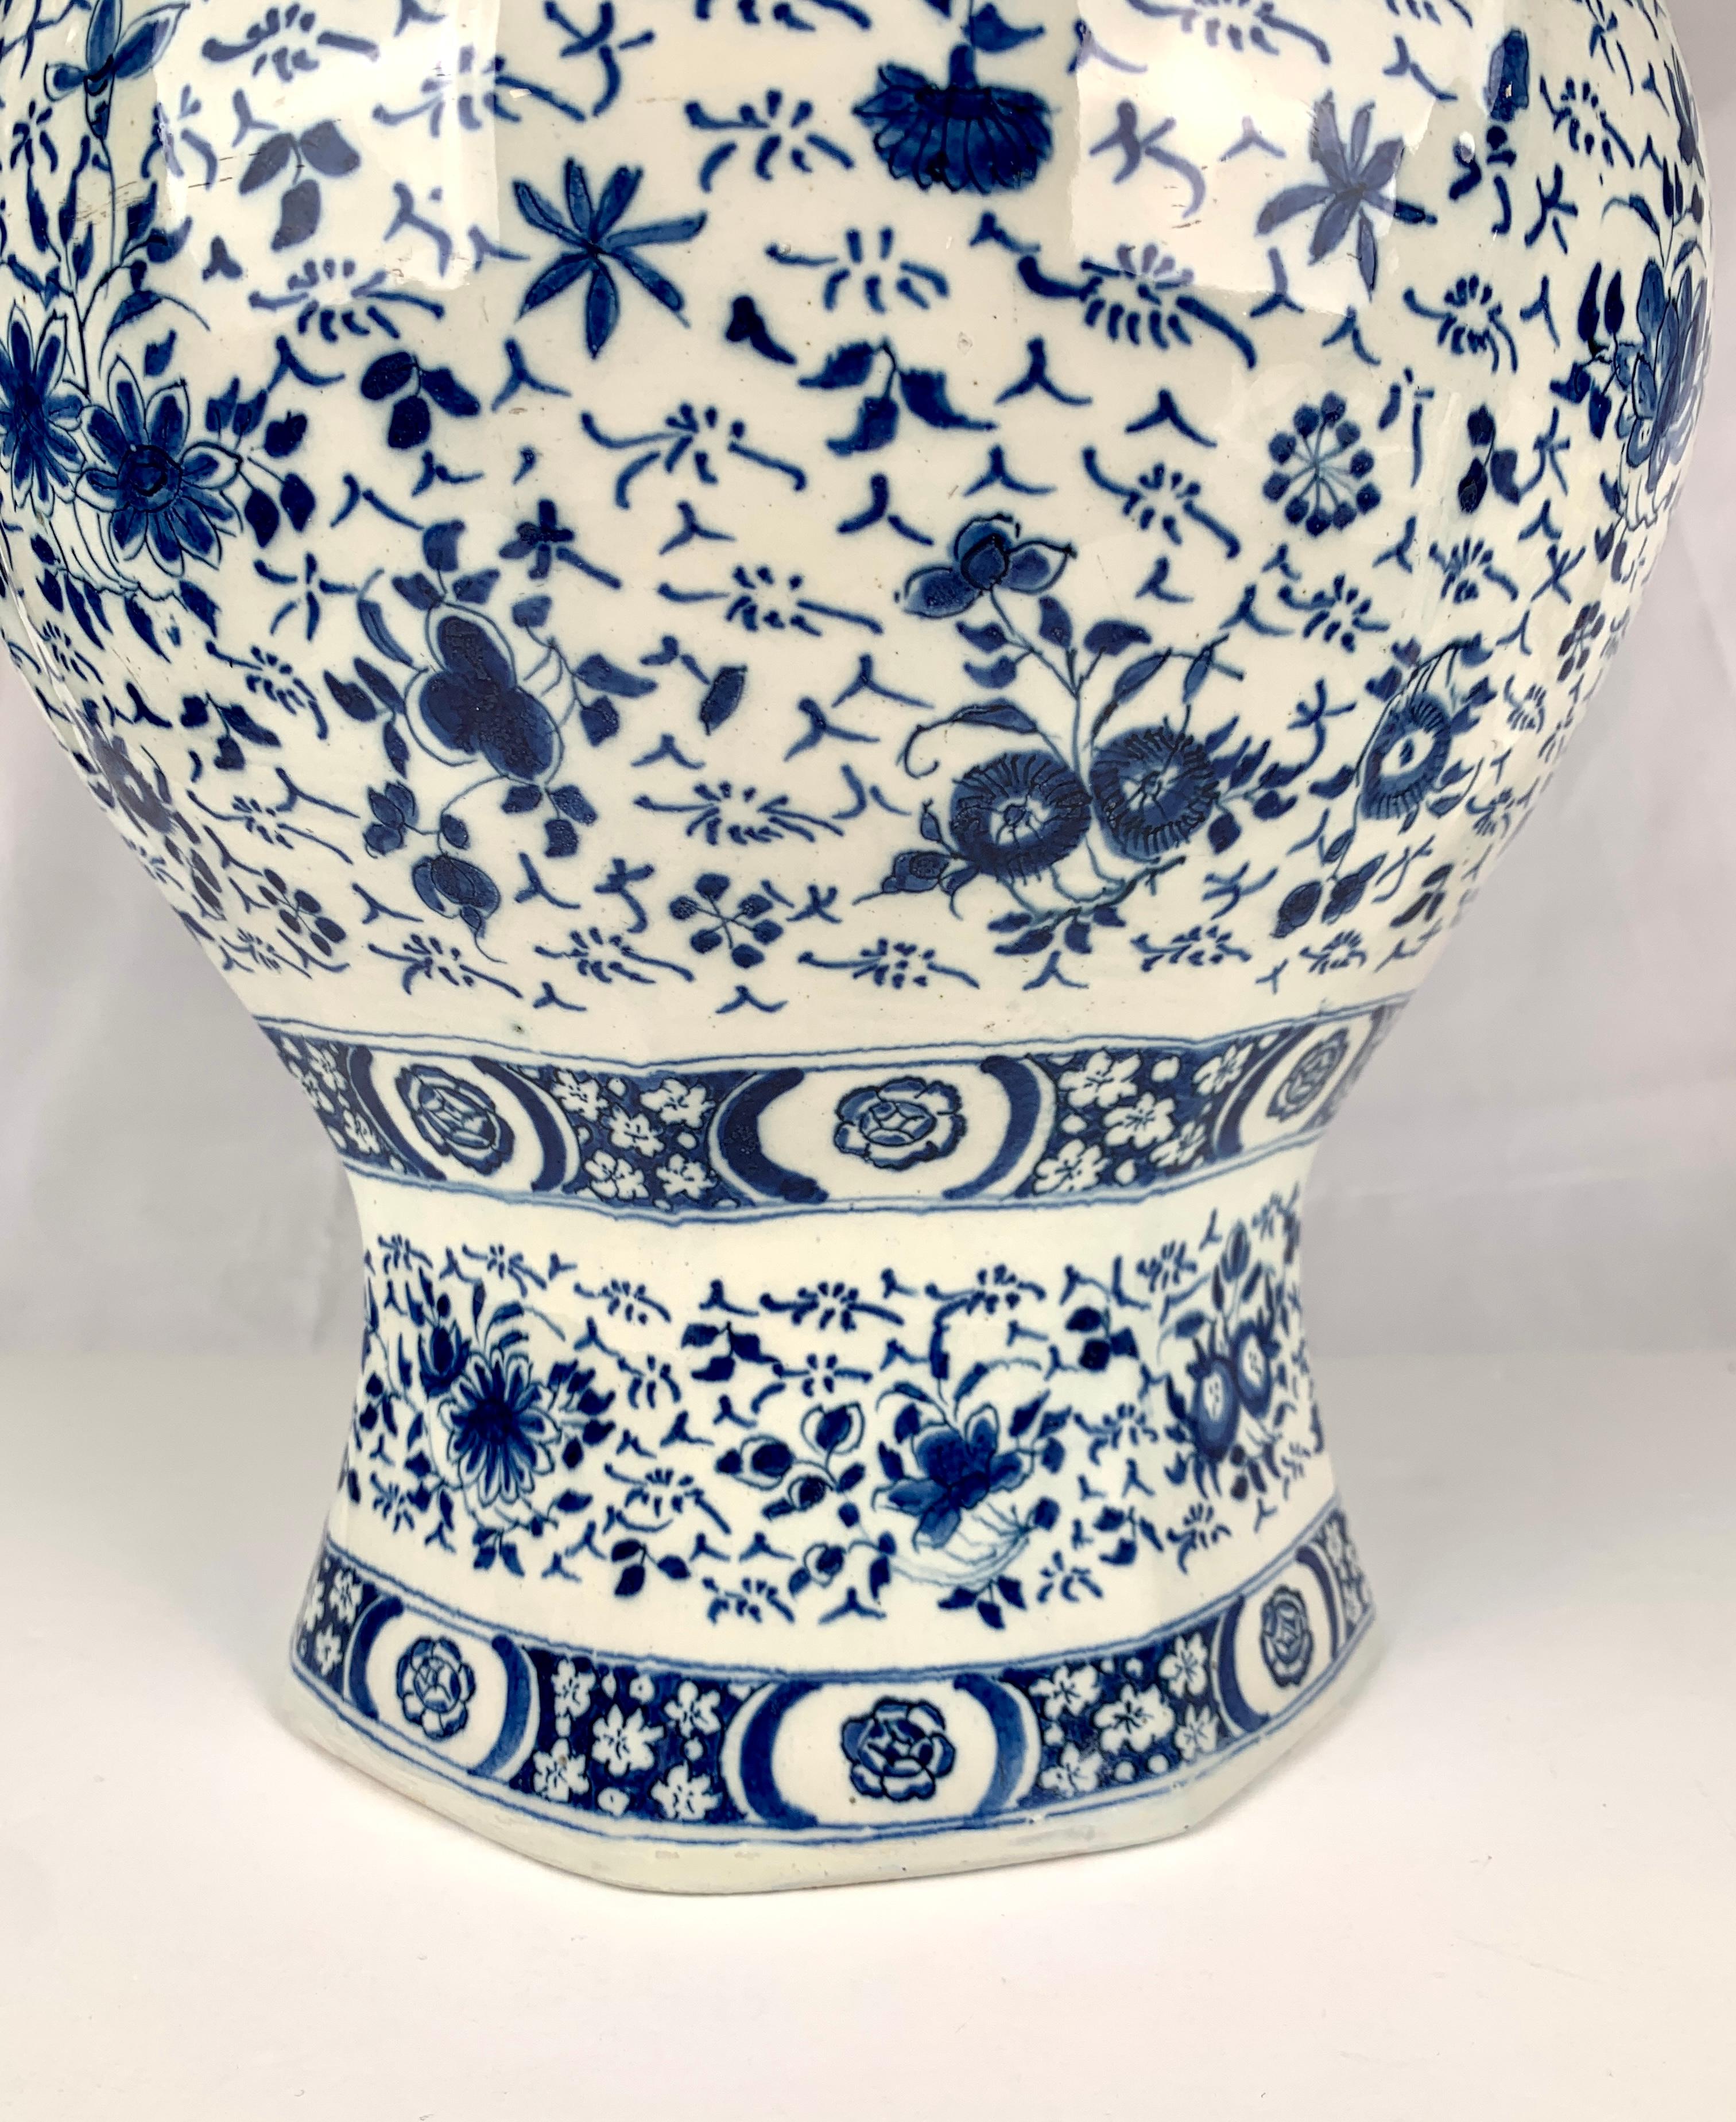 Hand-Painted Large Blue and White Dutch Delft Vase 18th Century, Circa 1770